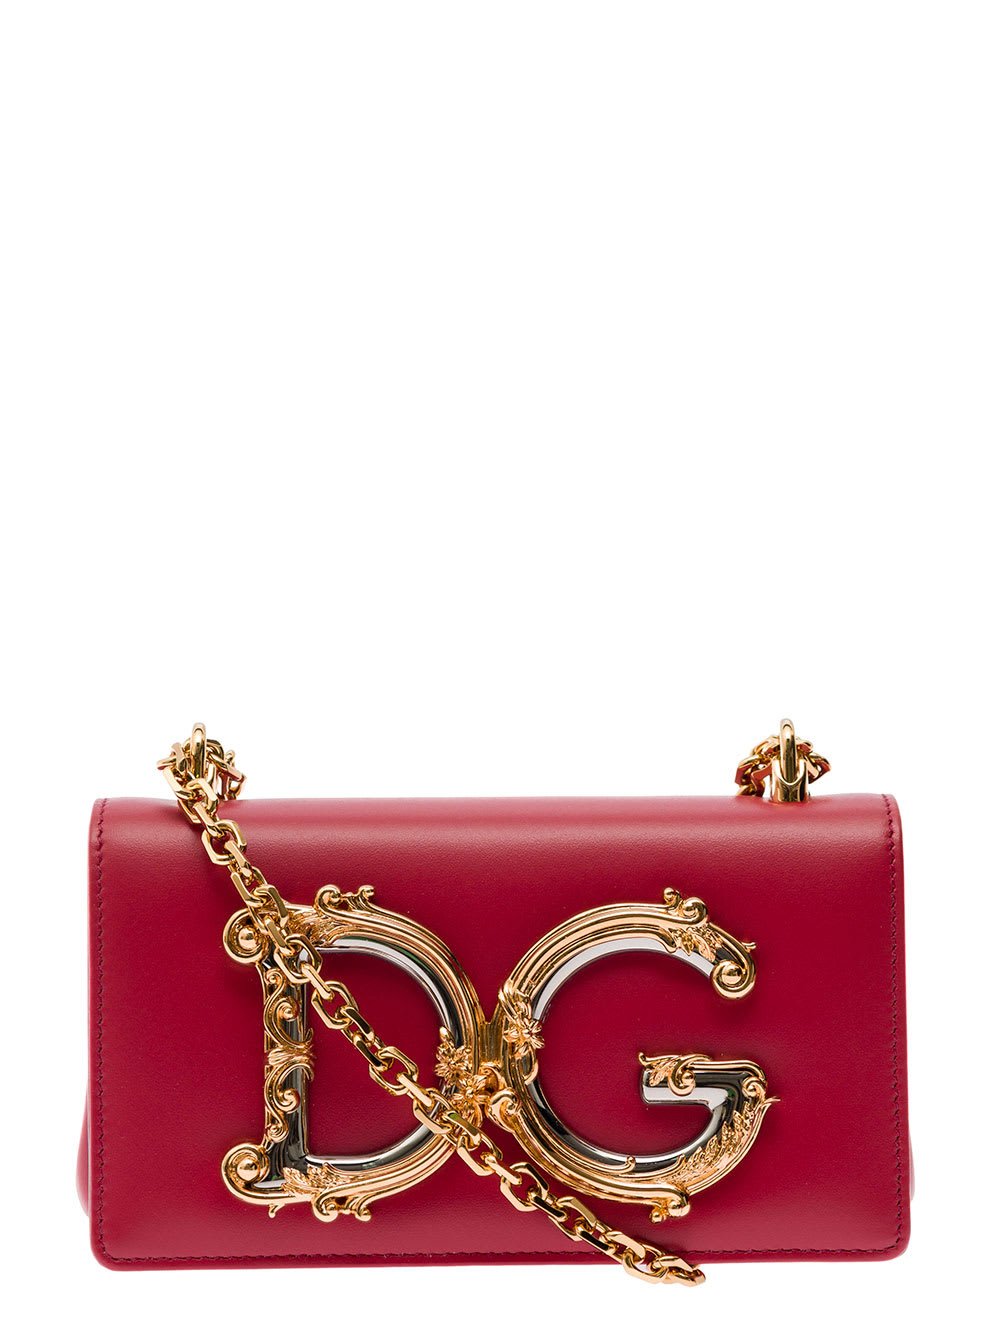 DOLCE & GABBANA DG GIRLS RED PHONE BAG WITH CHAIN STRAP AND BAROQUE LOGO IN LEATHER WOMAN